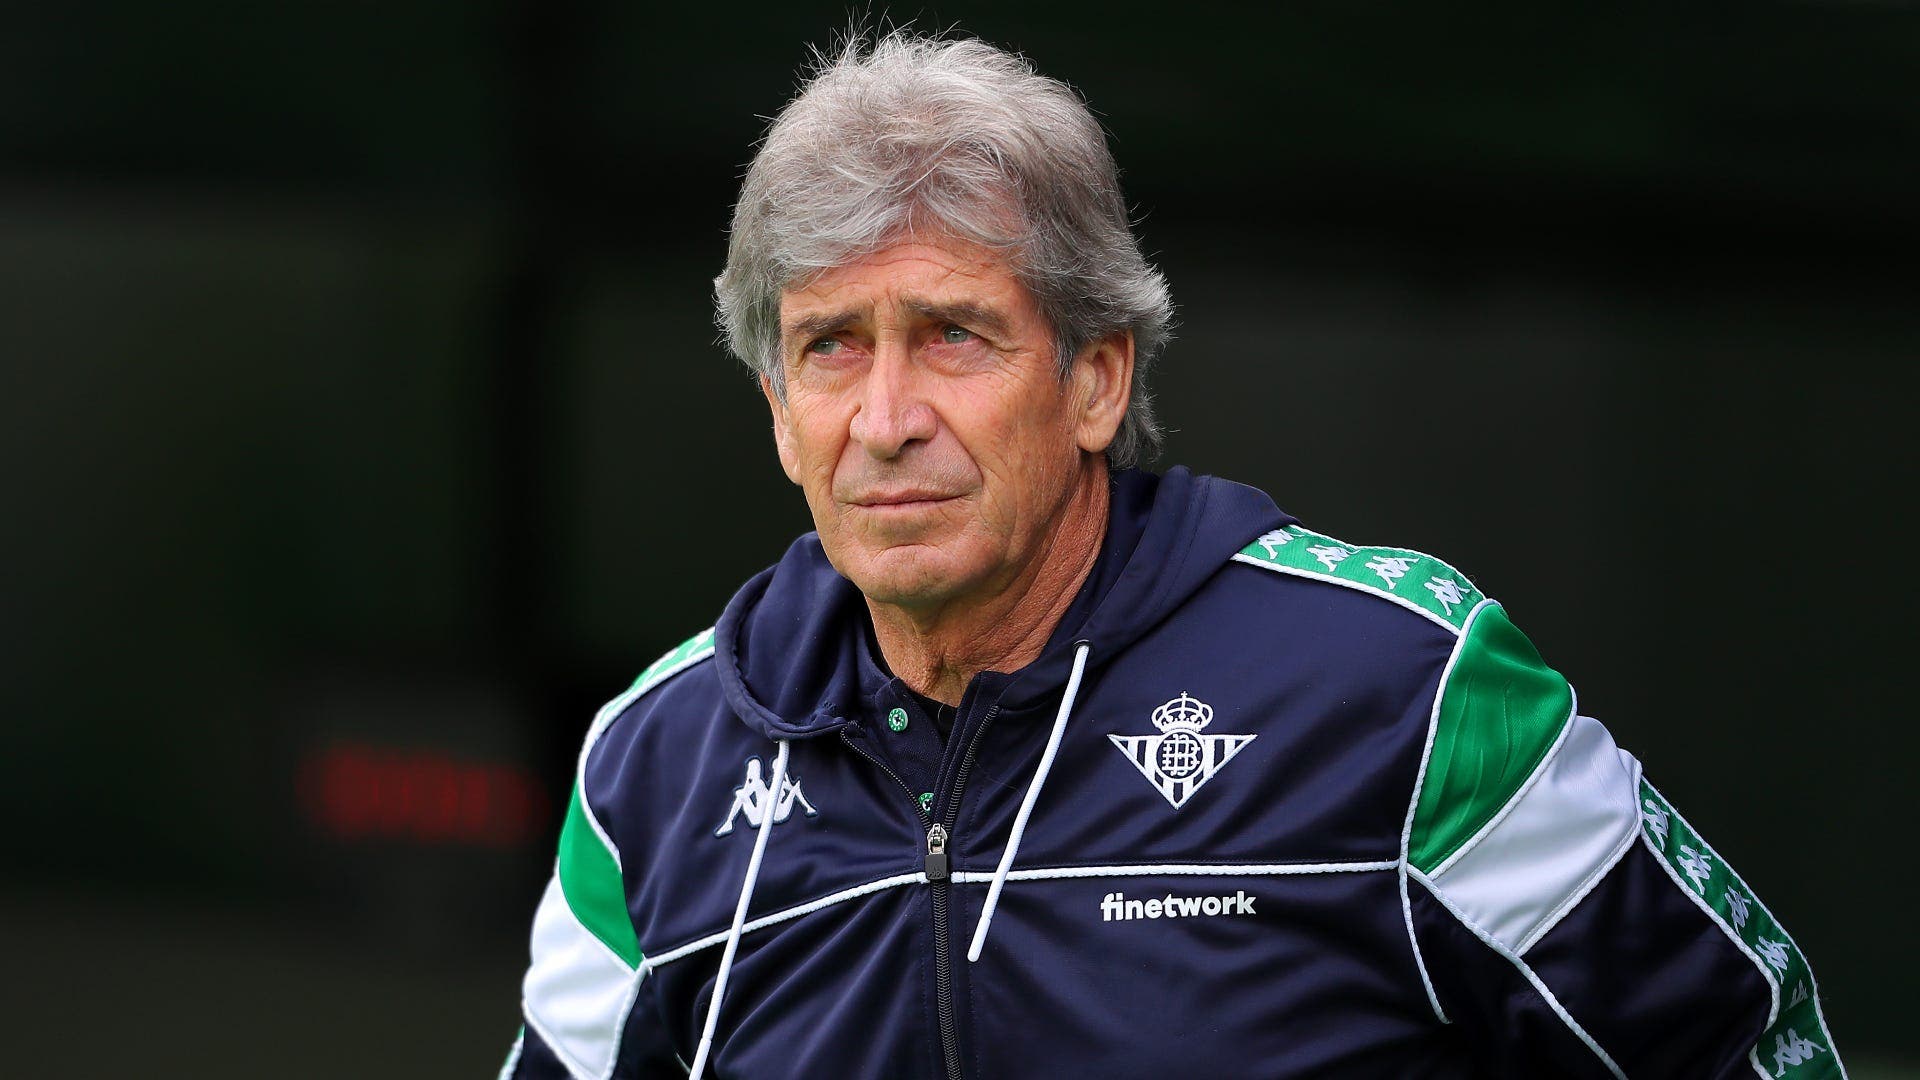 Pellegrini doubts his future for the new Betis project
	
